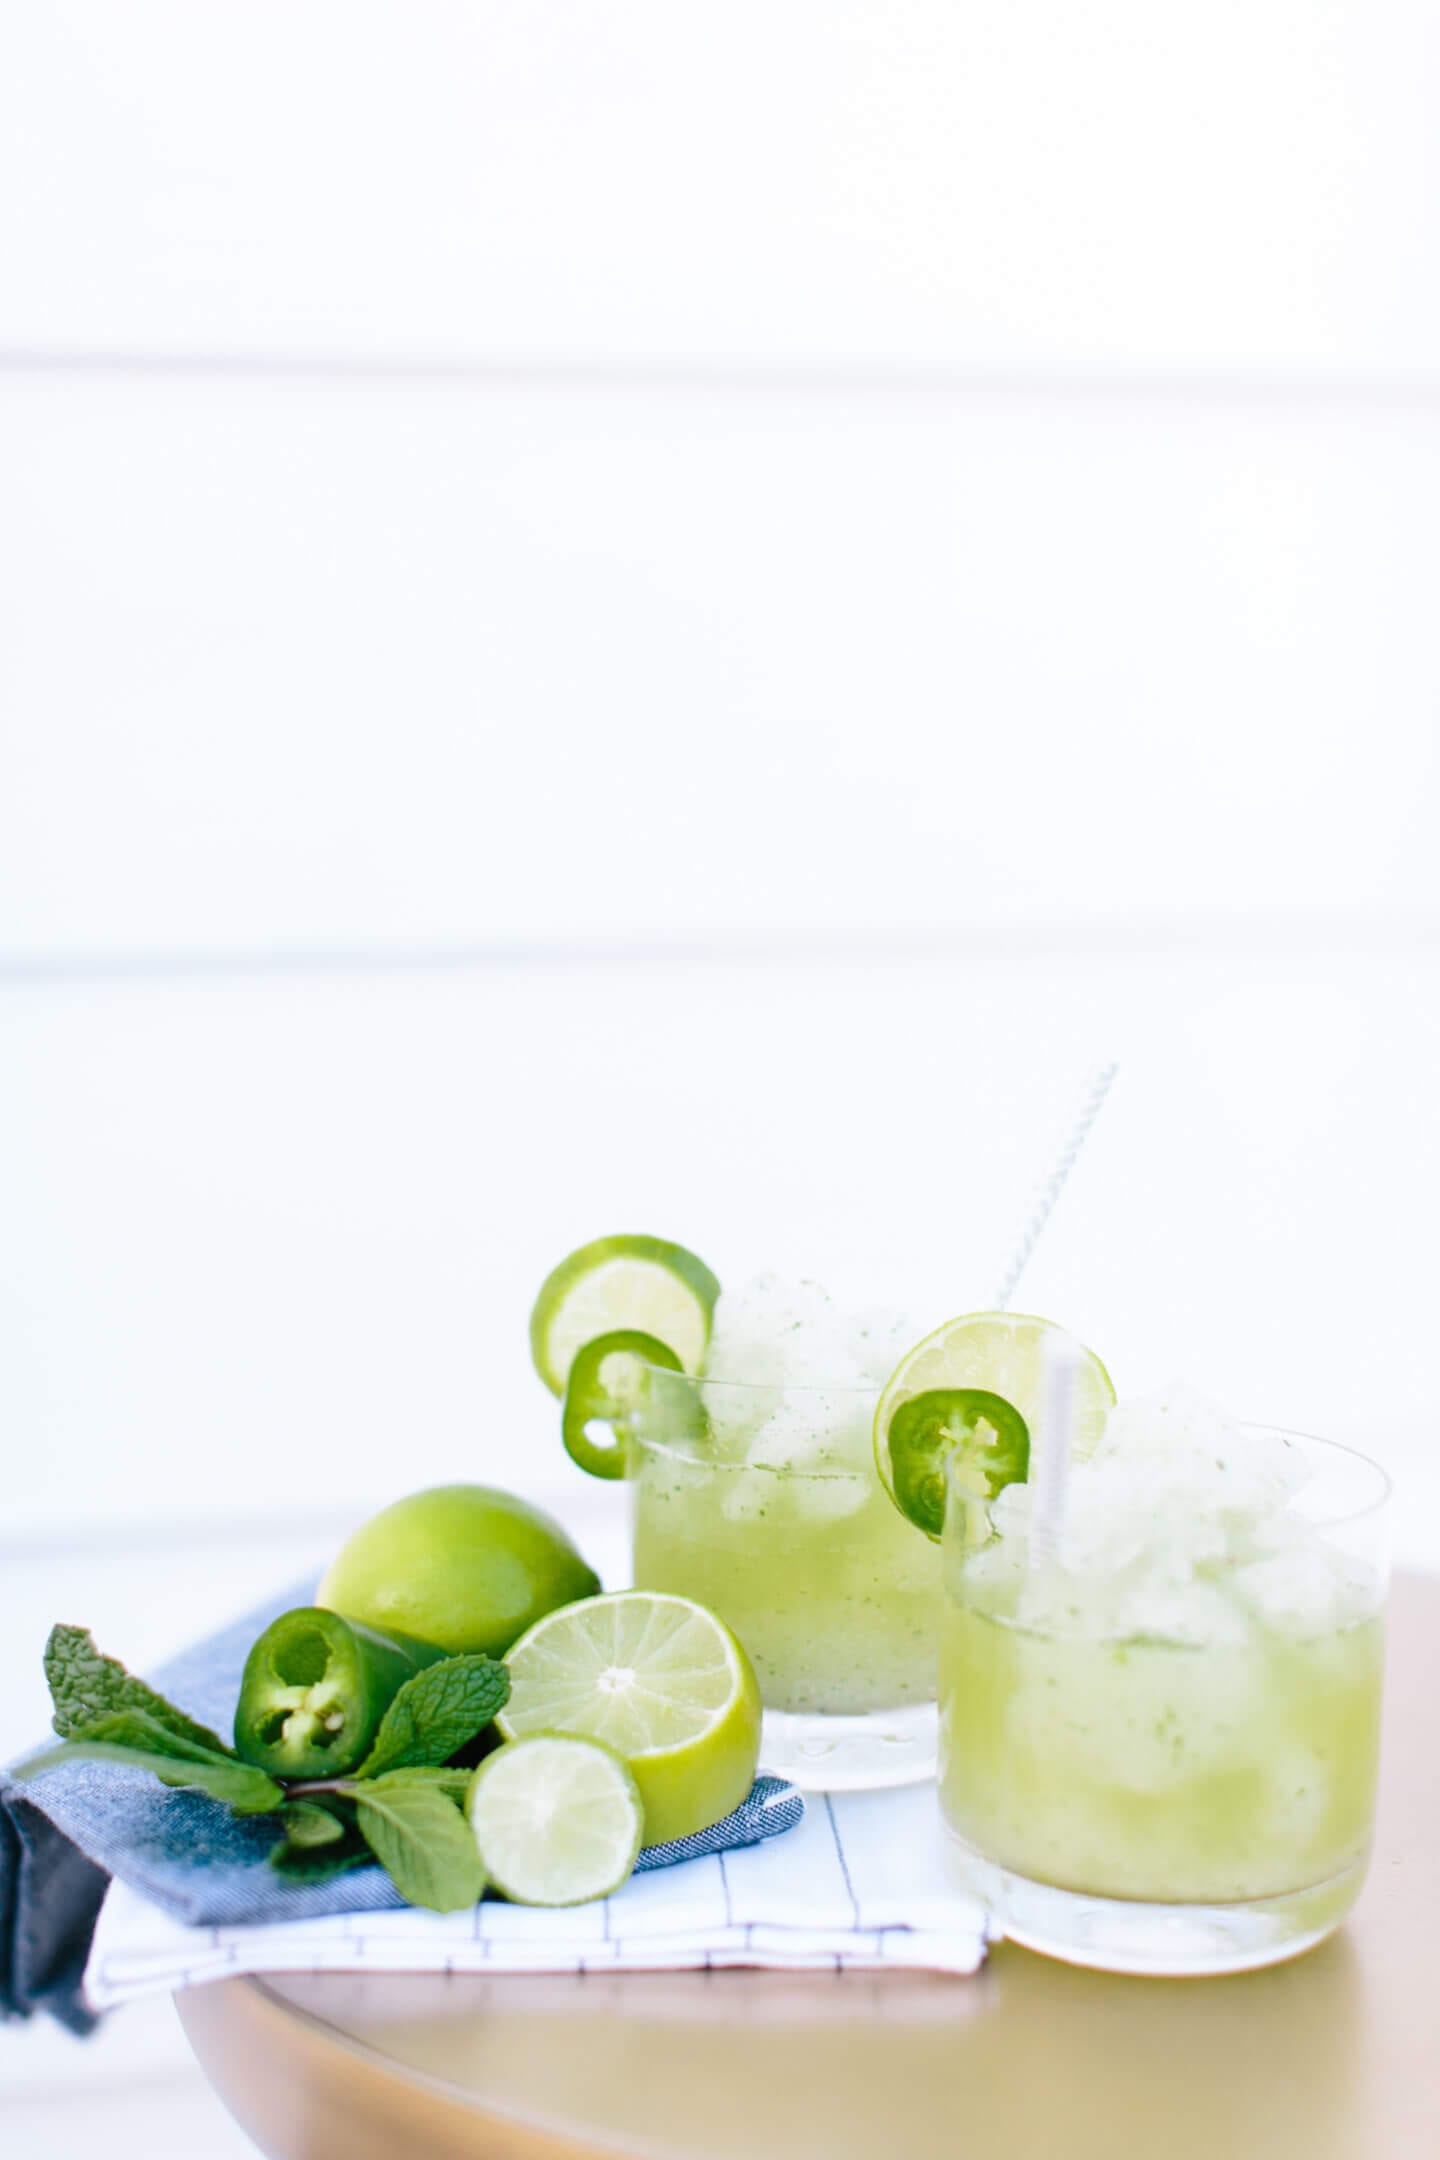 Make your own spicy lime margaritas to virtually travel the world